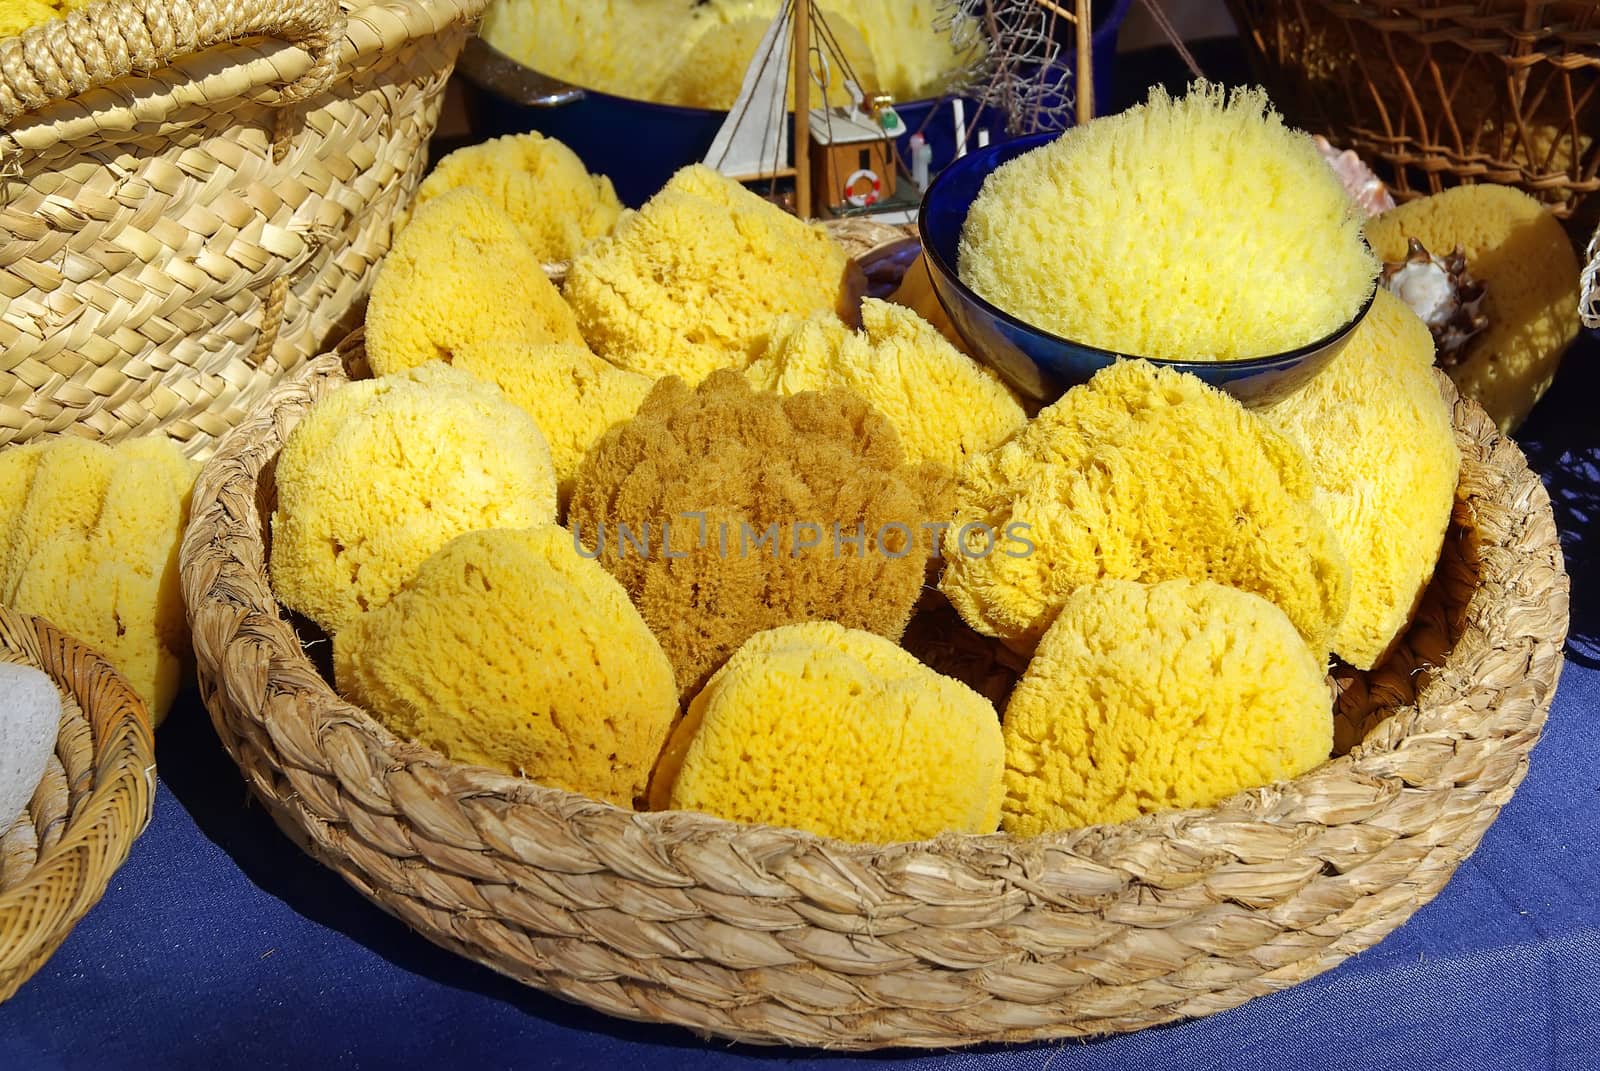 Natural and biological yellow sponges